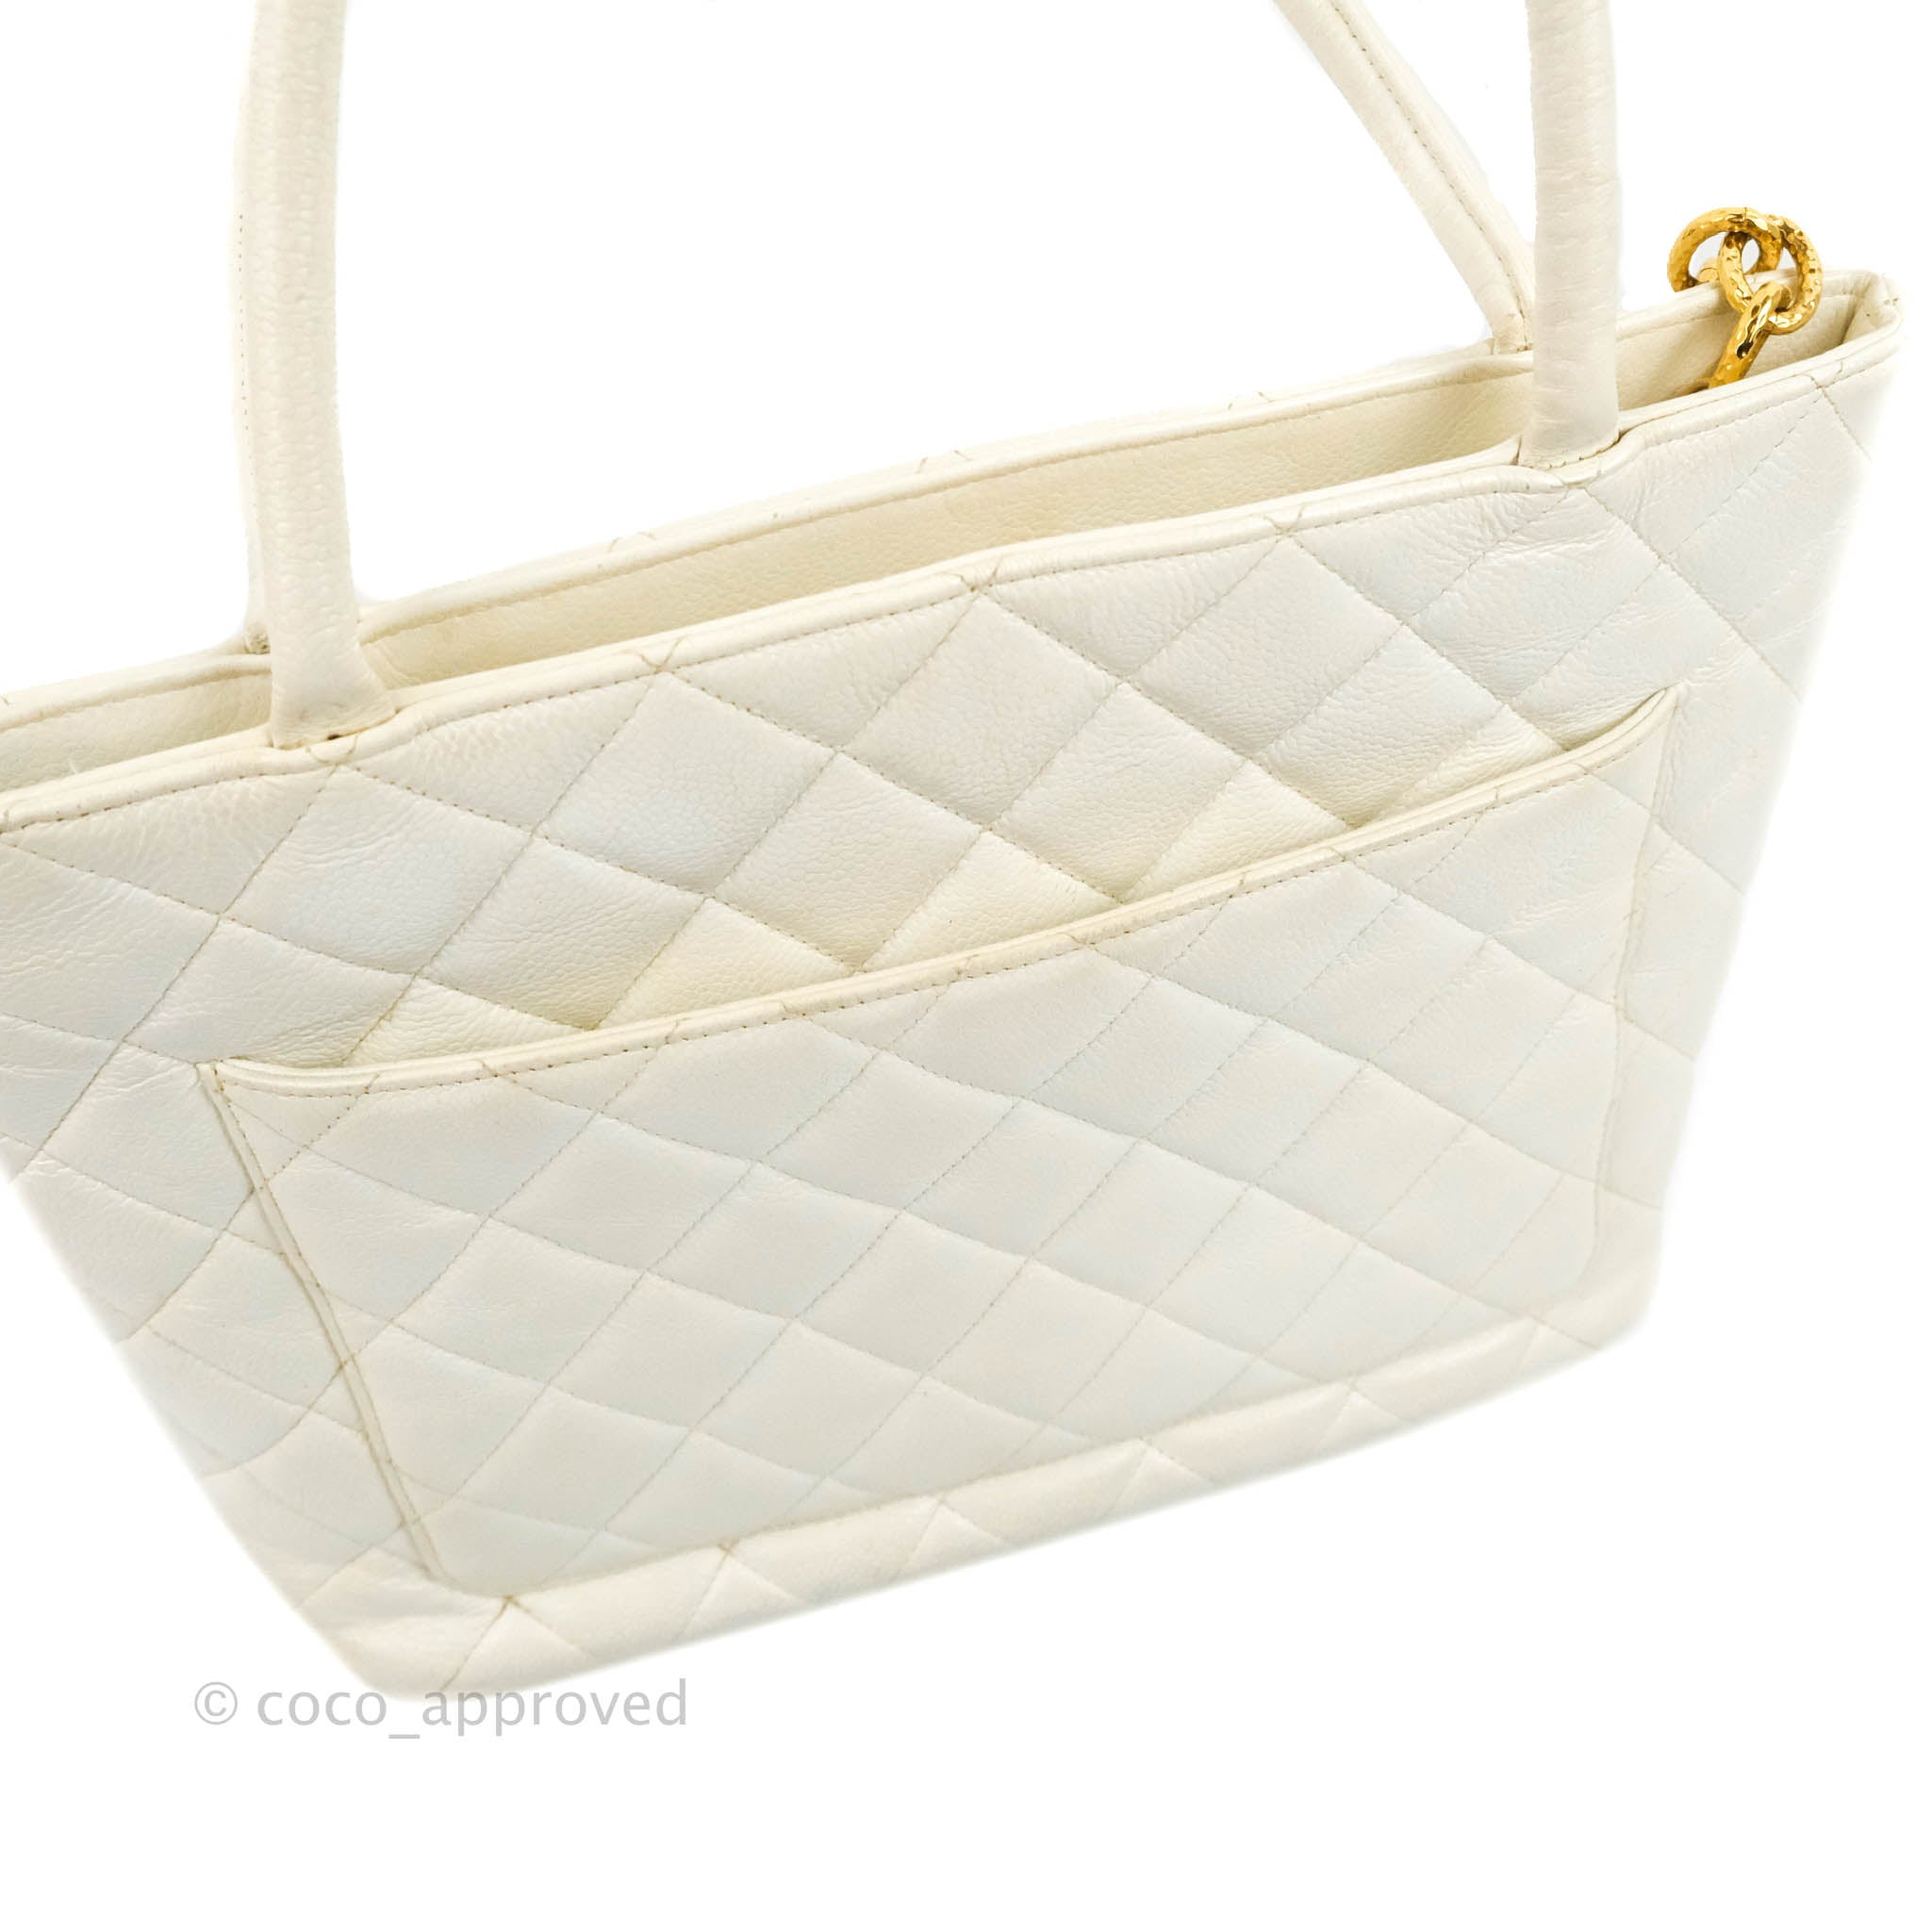 CHANEL Medallion Tote hand Bag Caviar skin White GHW Used Authentic From  Japan